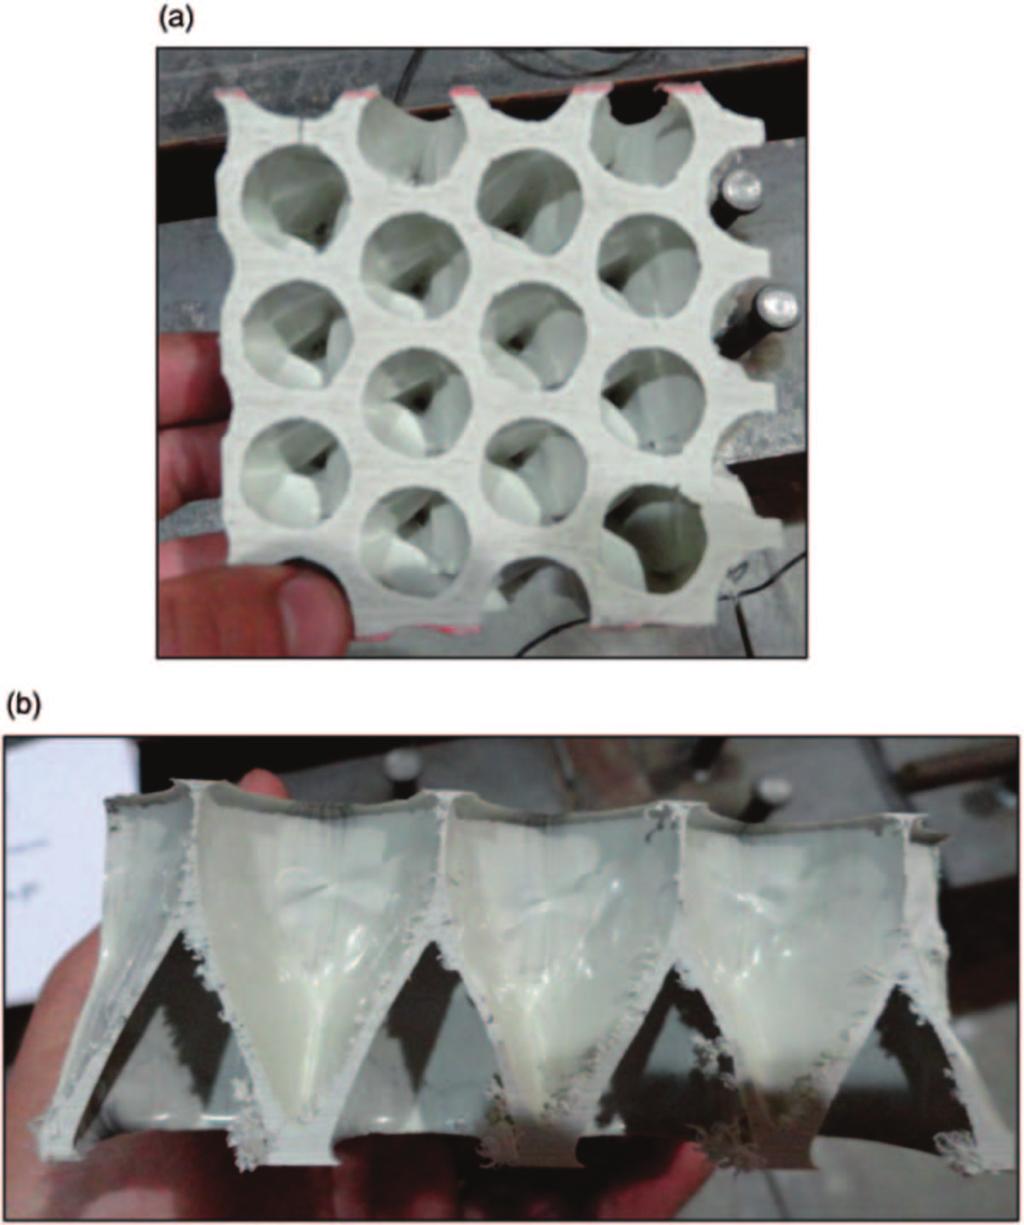 D ro p weight testing on sandw ich pa nels with thermoplastic core mat e r i a l 327 Figure 1. Cell structure of Norcore. (a) Top View (b) Edge View.